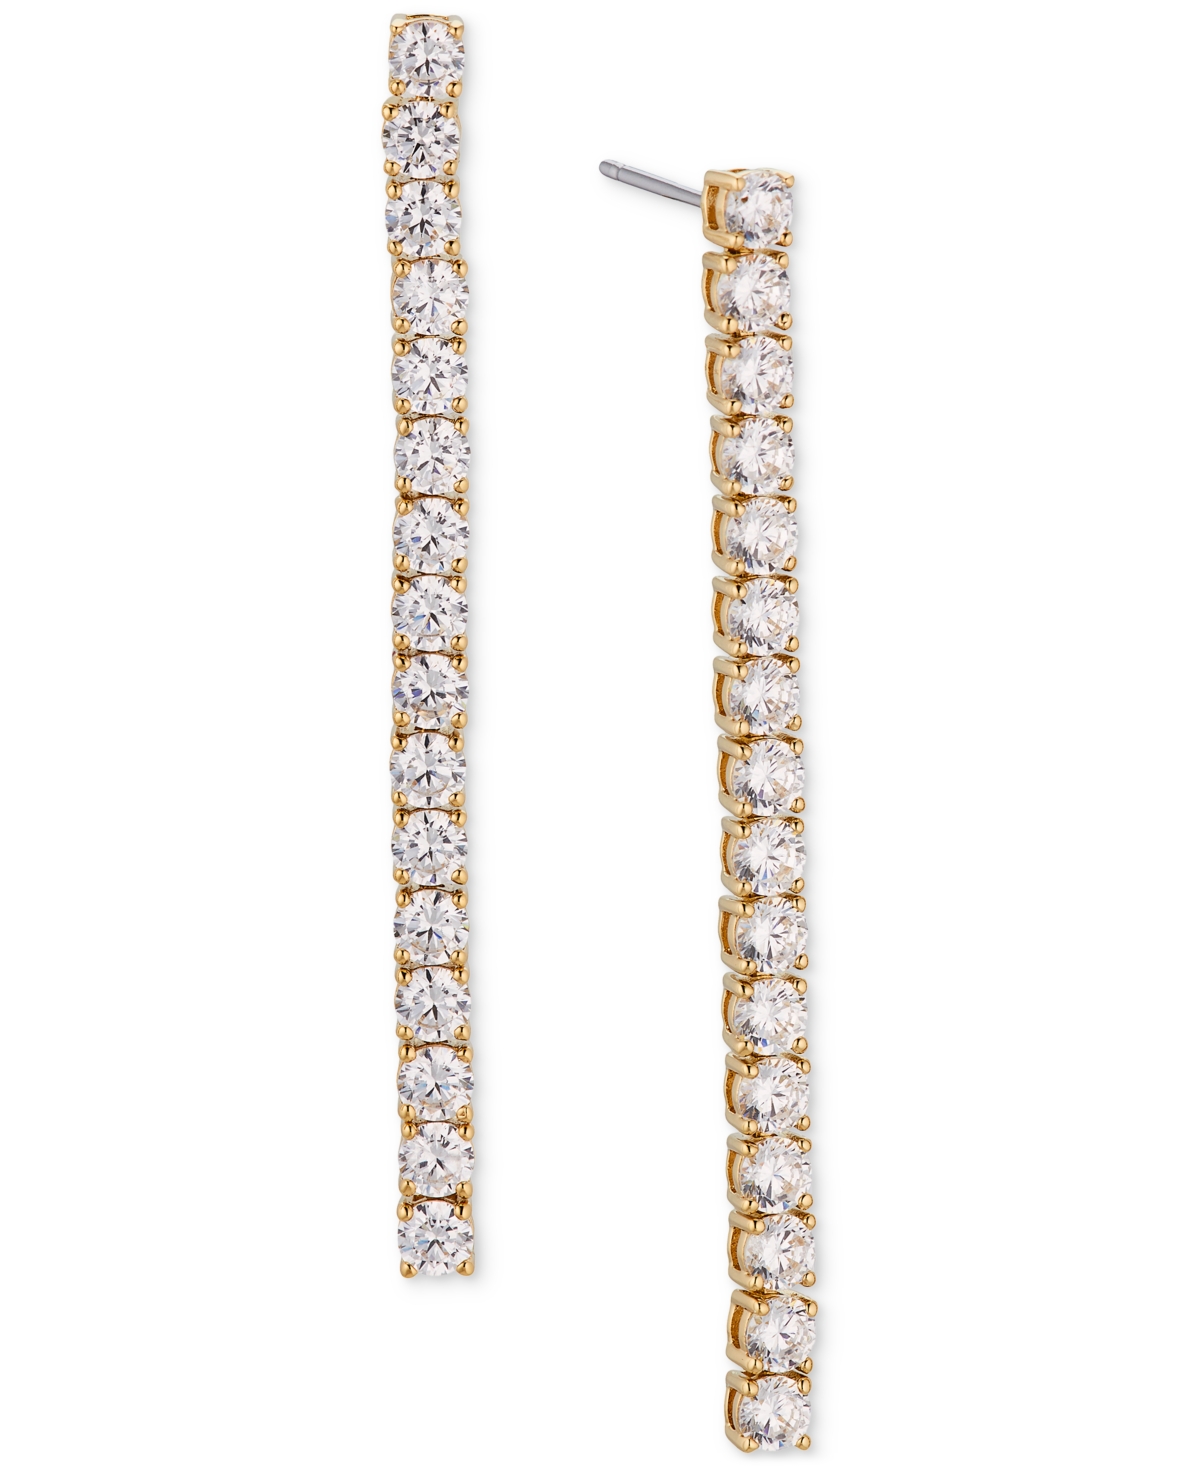 18k Gold-Plated Cubic Zirconia Linear Drop Earrings, Created for Macy's - Gold